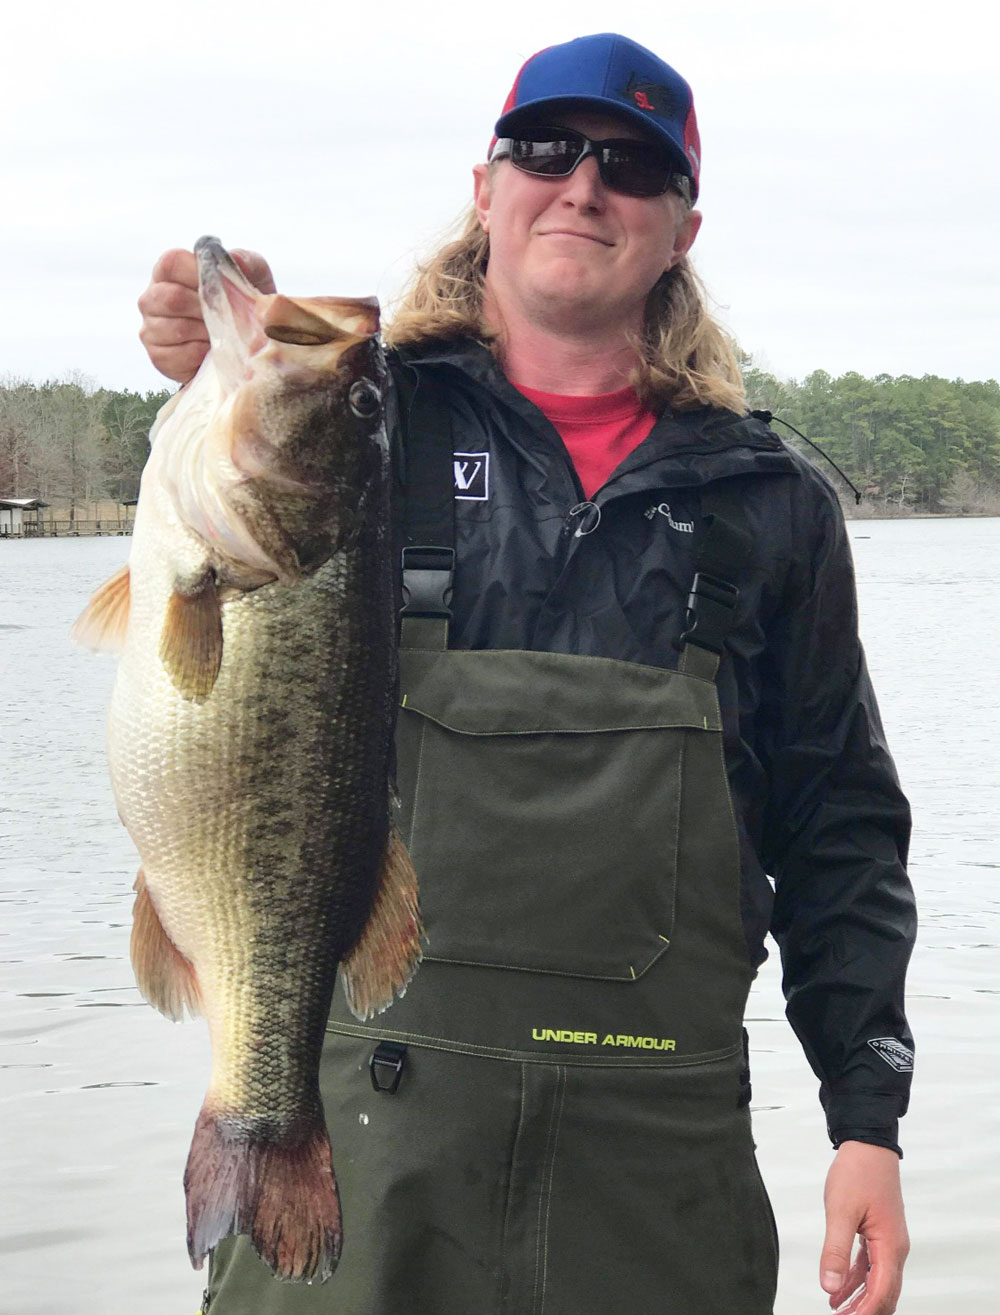 Sean Kennon, 27, of DeQuincy, shows off the monstrous 14-pound lunker largemouth he caught on the south end of Toledo Bend on Saturday, March 2. The big fish, which was tagged and released back into the reservoir, bit a Santone Lures 3/4-ounce football jig in peanut butter and jelly color in about 24 feet of water.